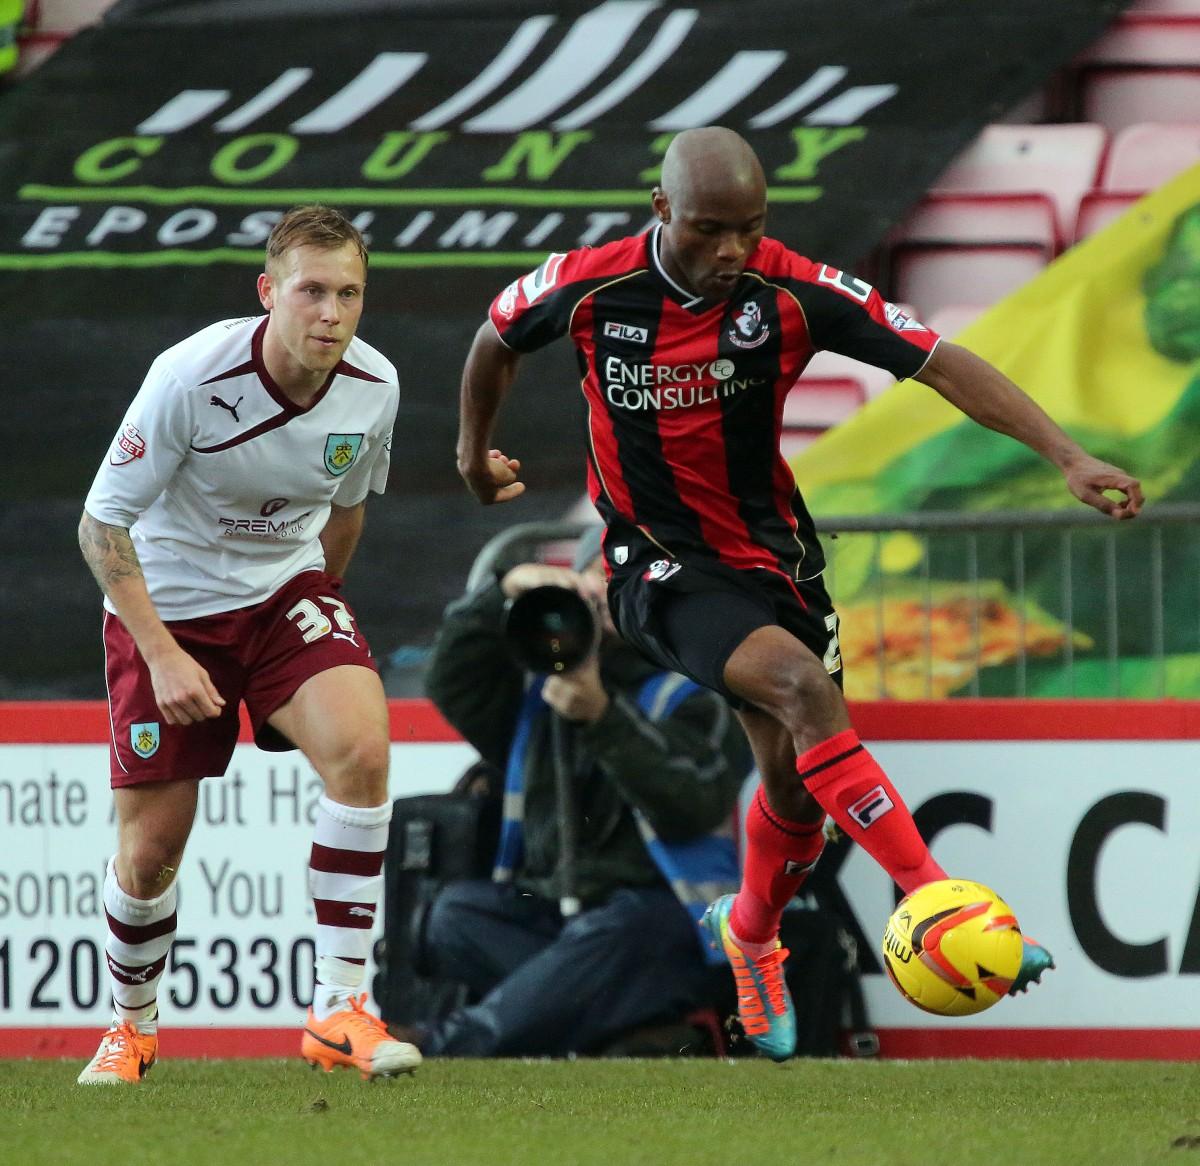 All our pictures of AFC Bournemouth v Burnley at the Goldsands Stadium on Saturday, February 15th, 2014.